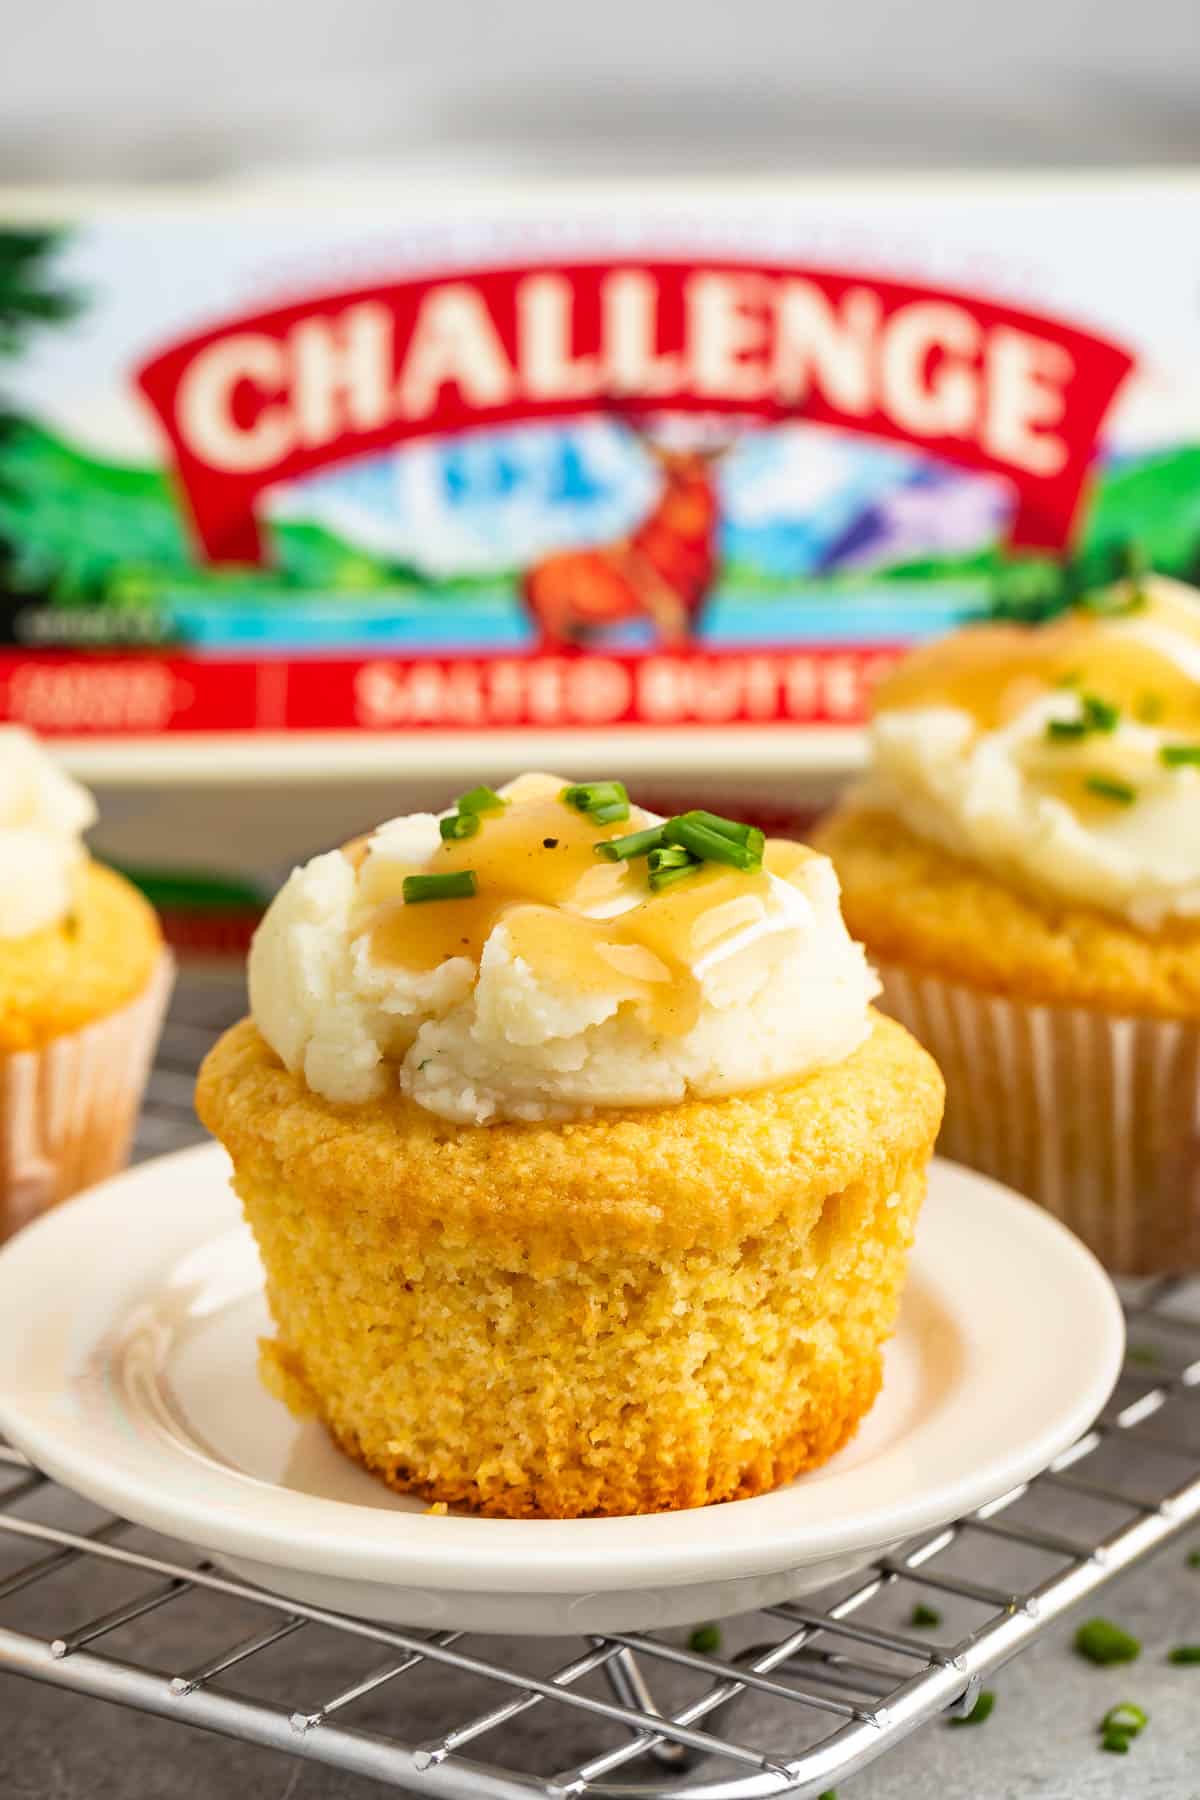 photo showing cupcake with mashed potato frosting and gravy and chives on top